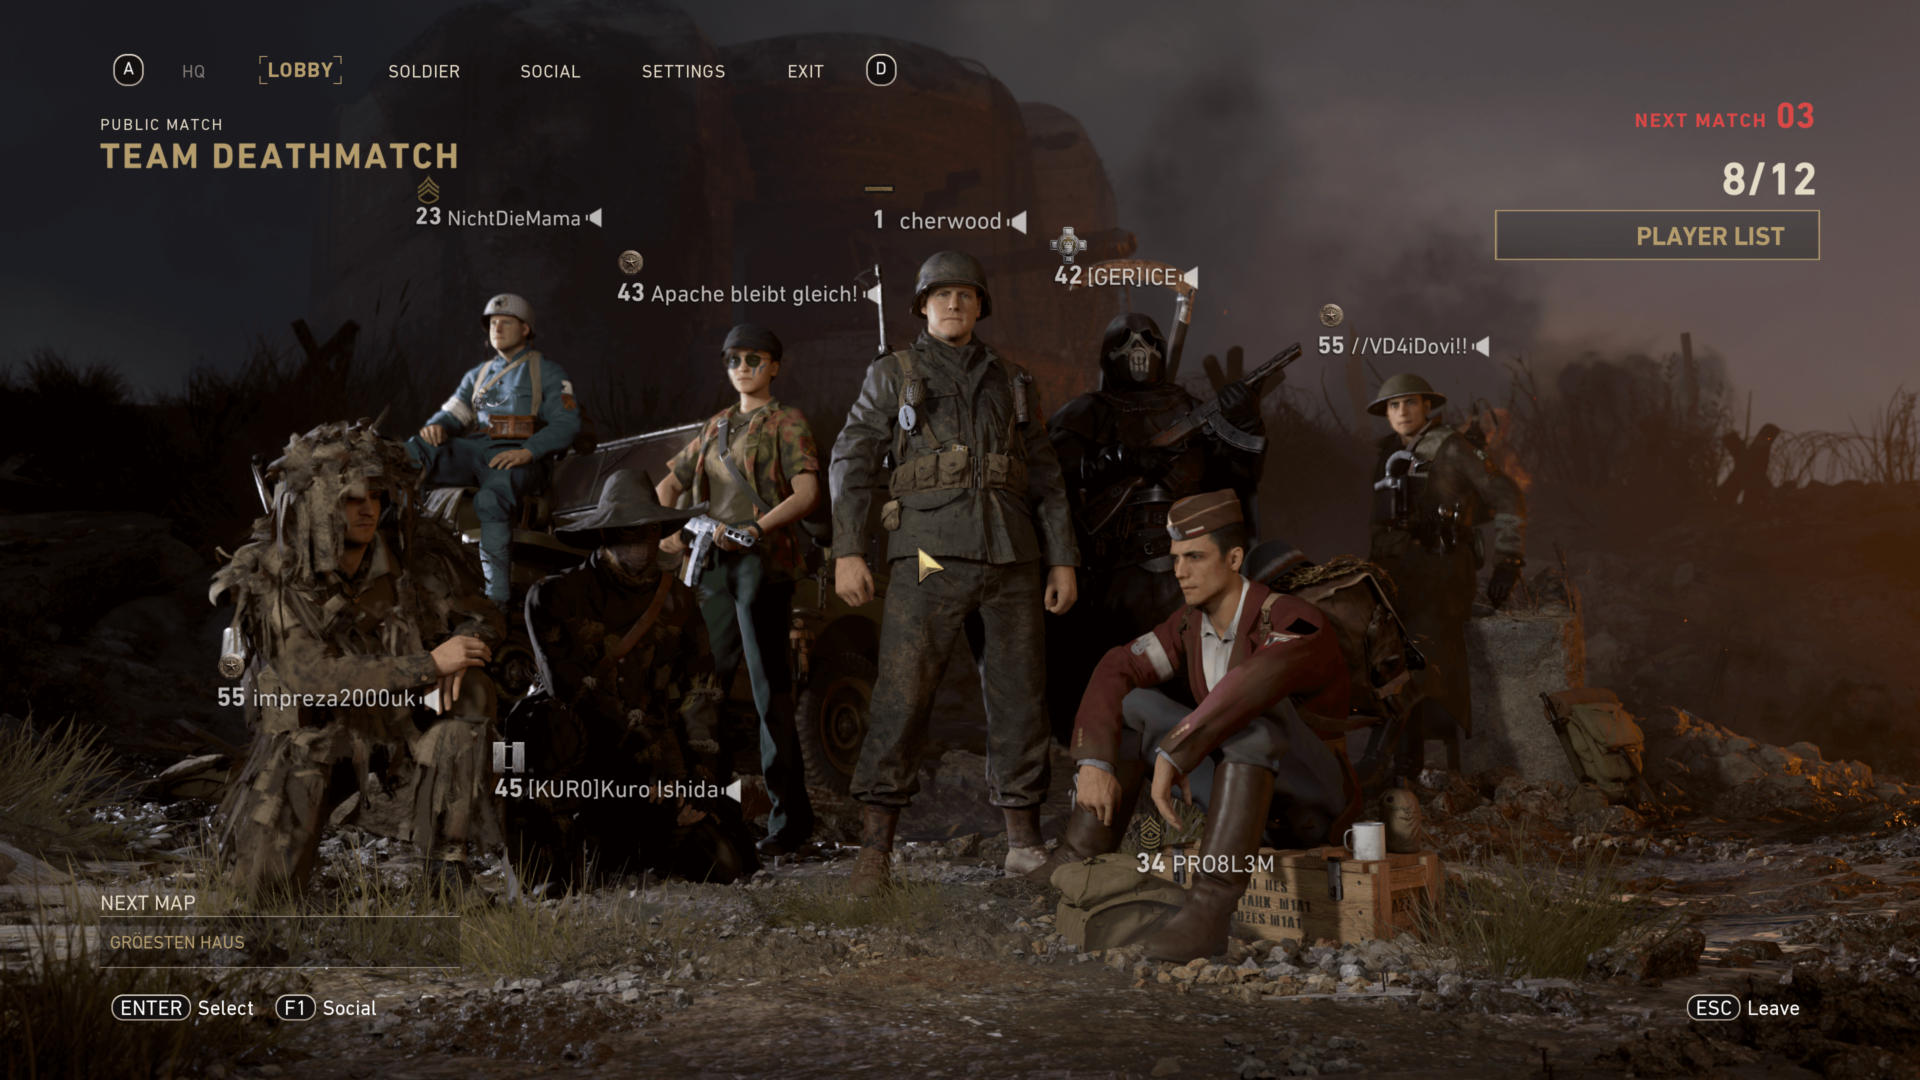 Lobby screenshot of Call of Duty: WWII video game interface.